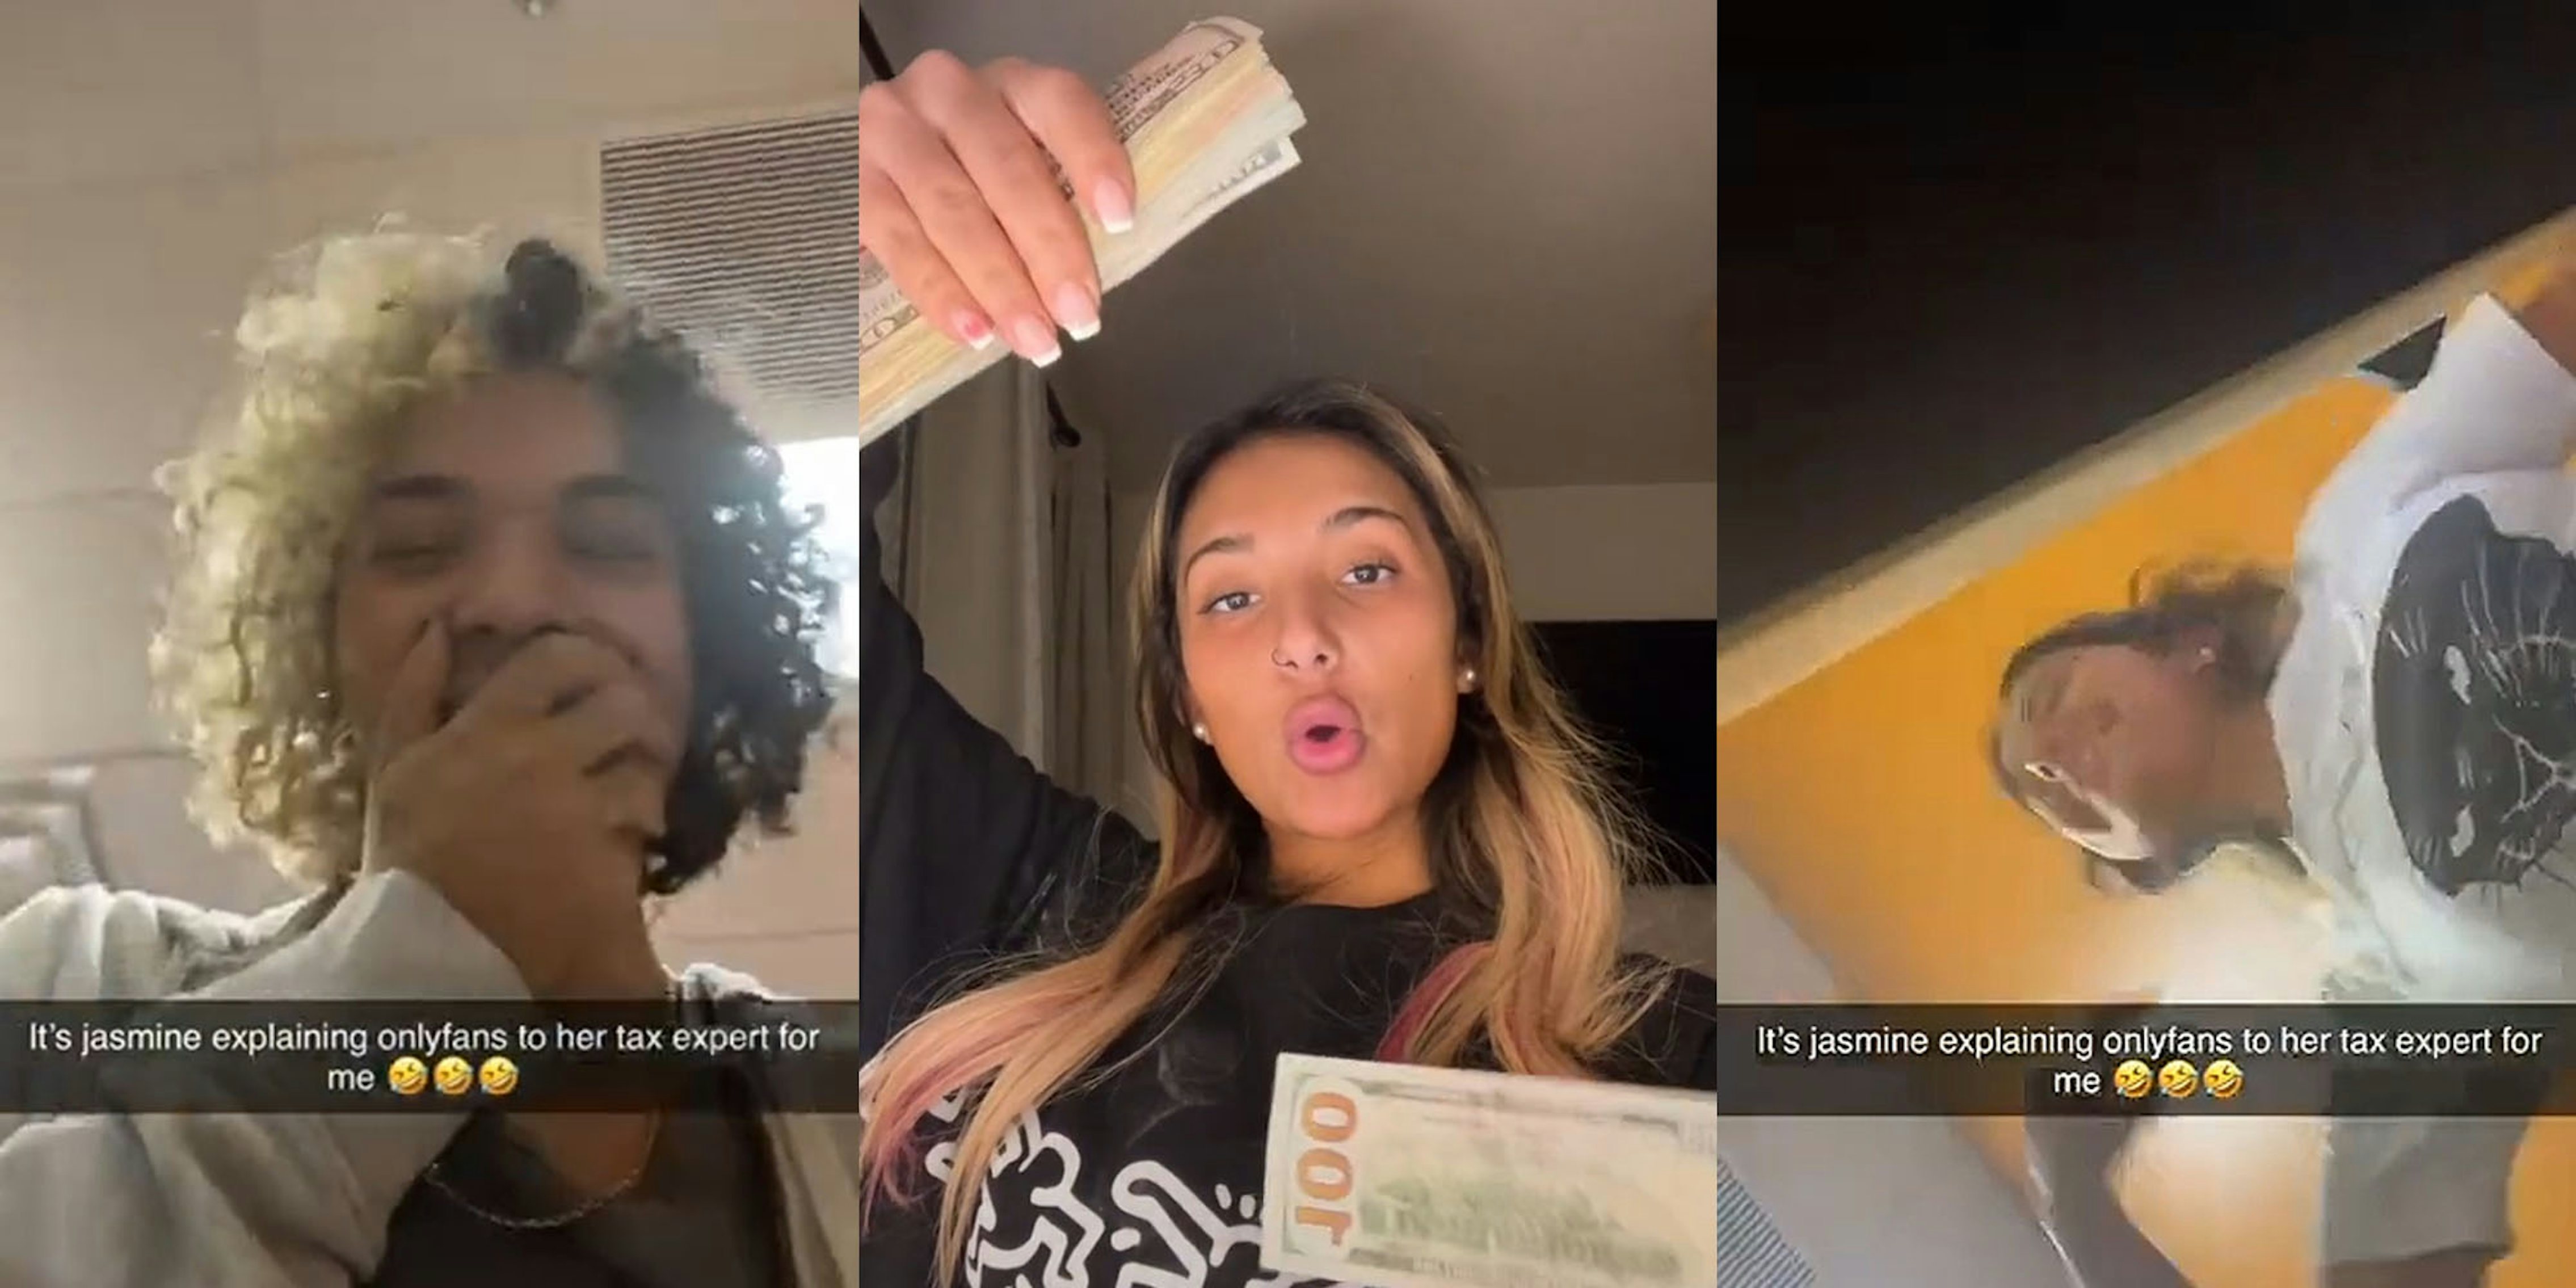 Woman hand over mouth laughing caption 'It's Jasmine explaining onlyfans to her tax expert for me' (l) OnlyFans creator flashing money dropping some open mouth (c) Jasmine onlyfans worker laighing dancing at tax meeting caption 'It's Jasmine explaining onlyfans to her tax expert' (r)